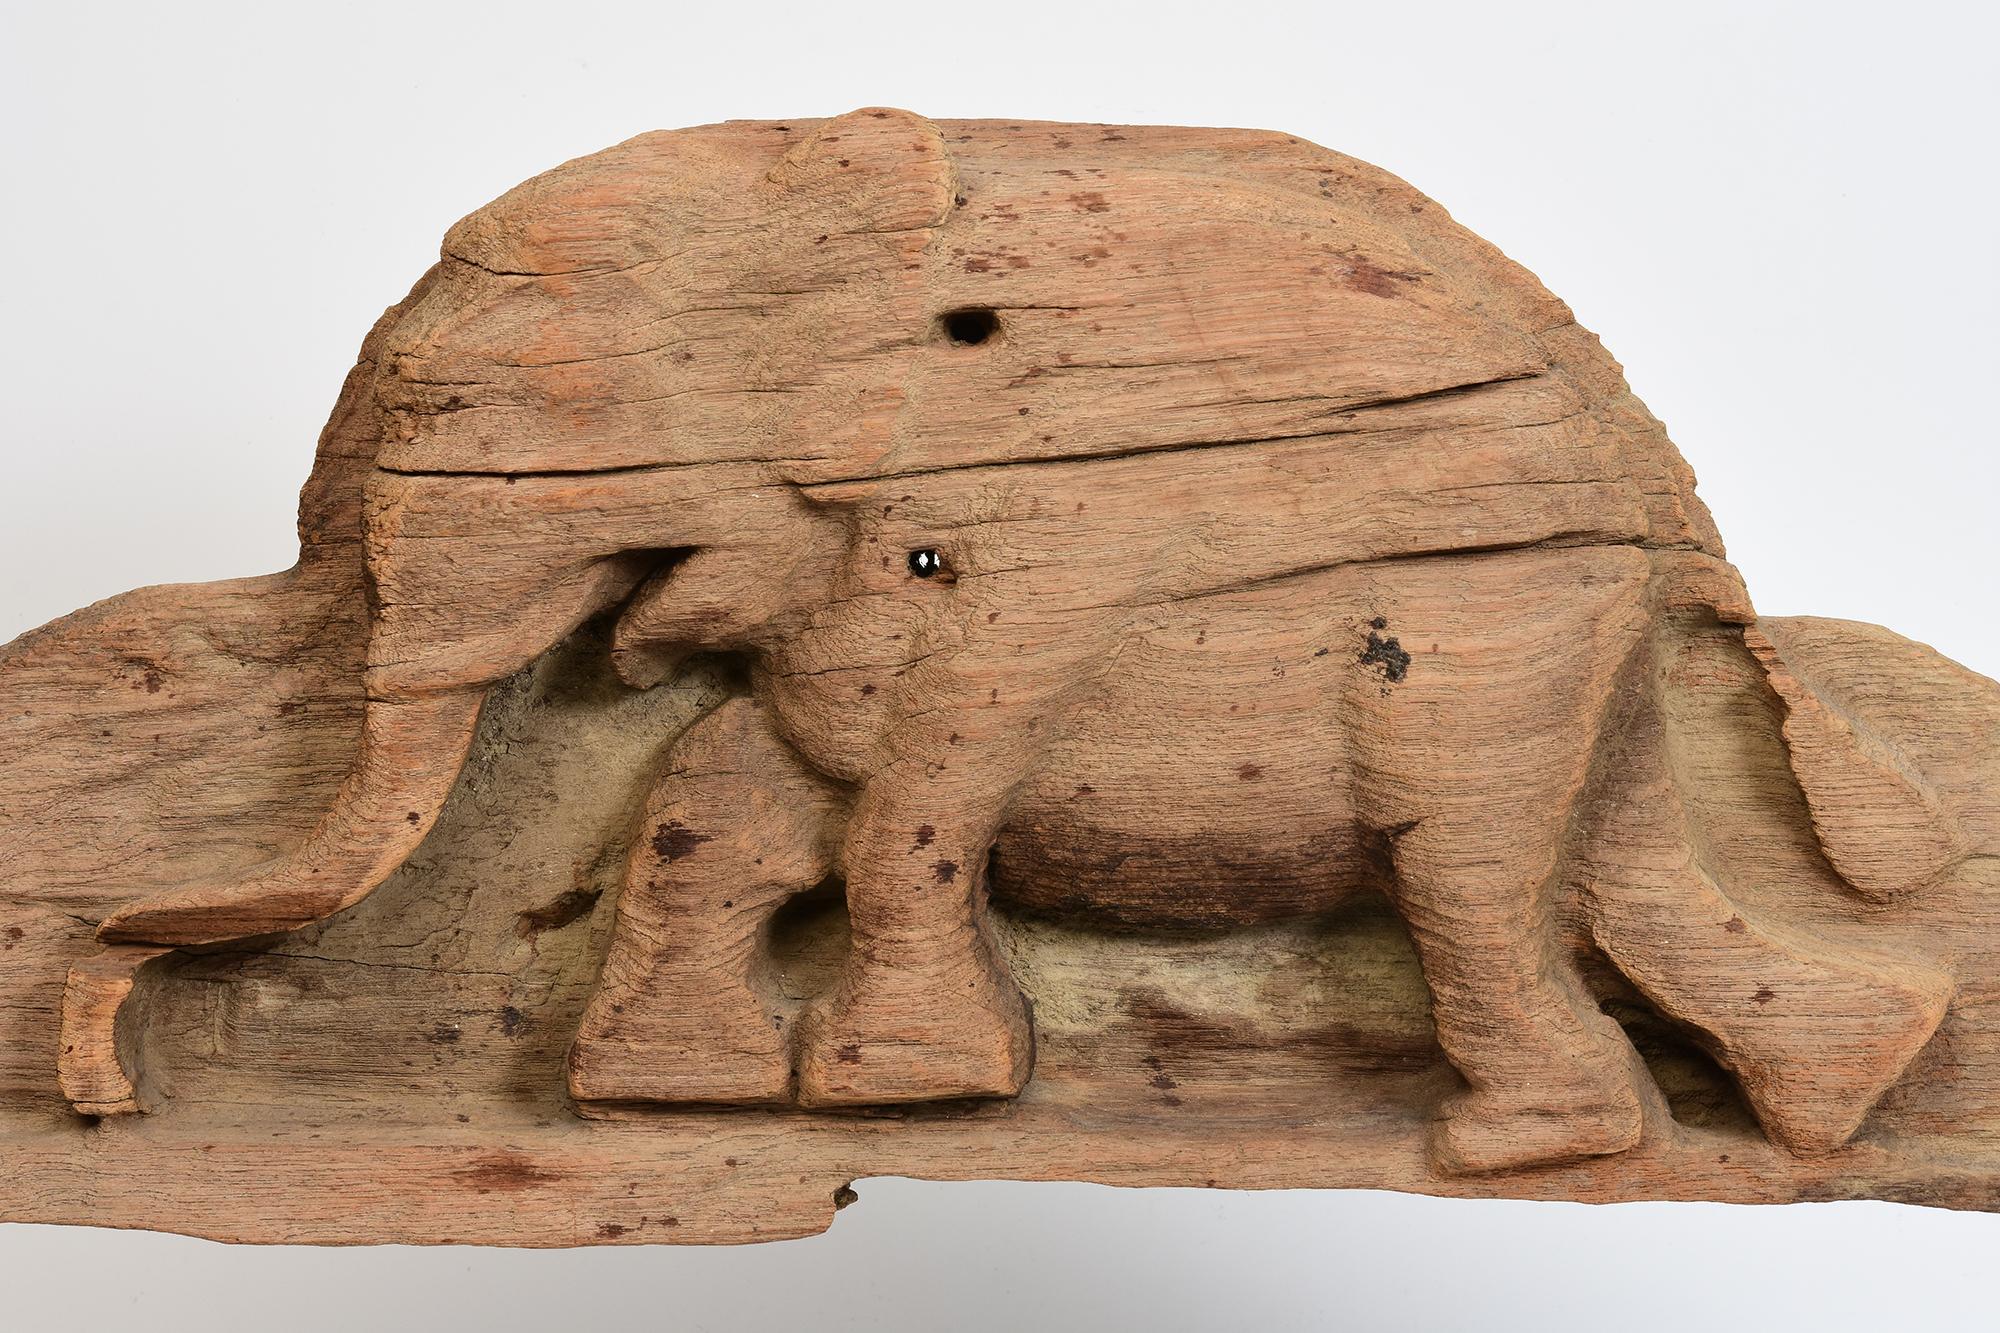 Burmese wood carving panel with animal elephant, the carved have a curved shape.

Age: Burma, Mandalay Period, 19th Century
Size: Length 89.5 C.M. / Width 25.8 C.M. / Thickness 4.8 C.M.
Size including stand: Height 45 C.M.
Condition: Nice condition